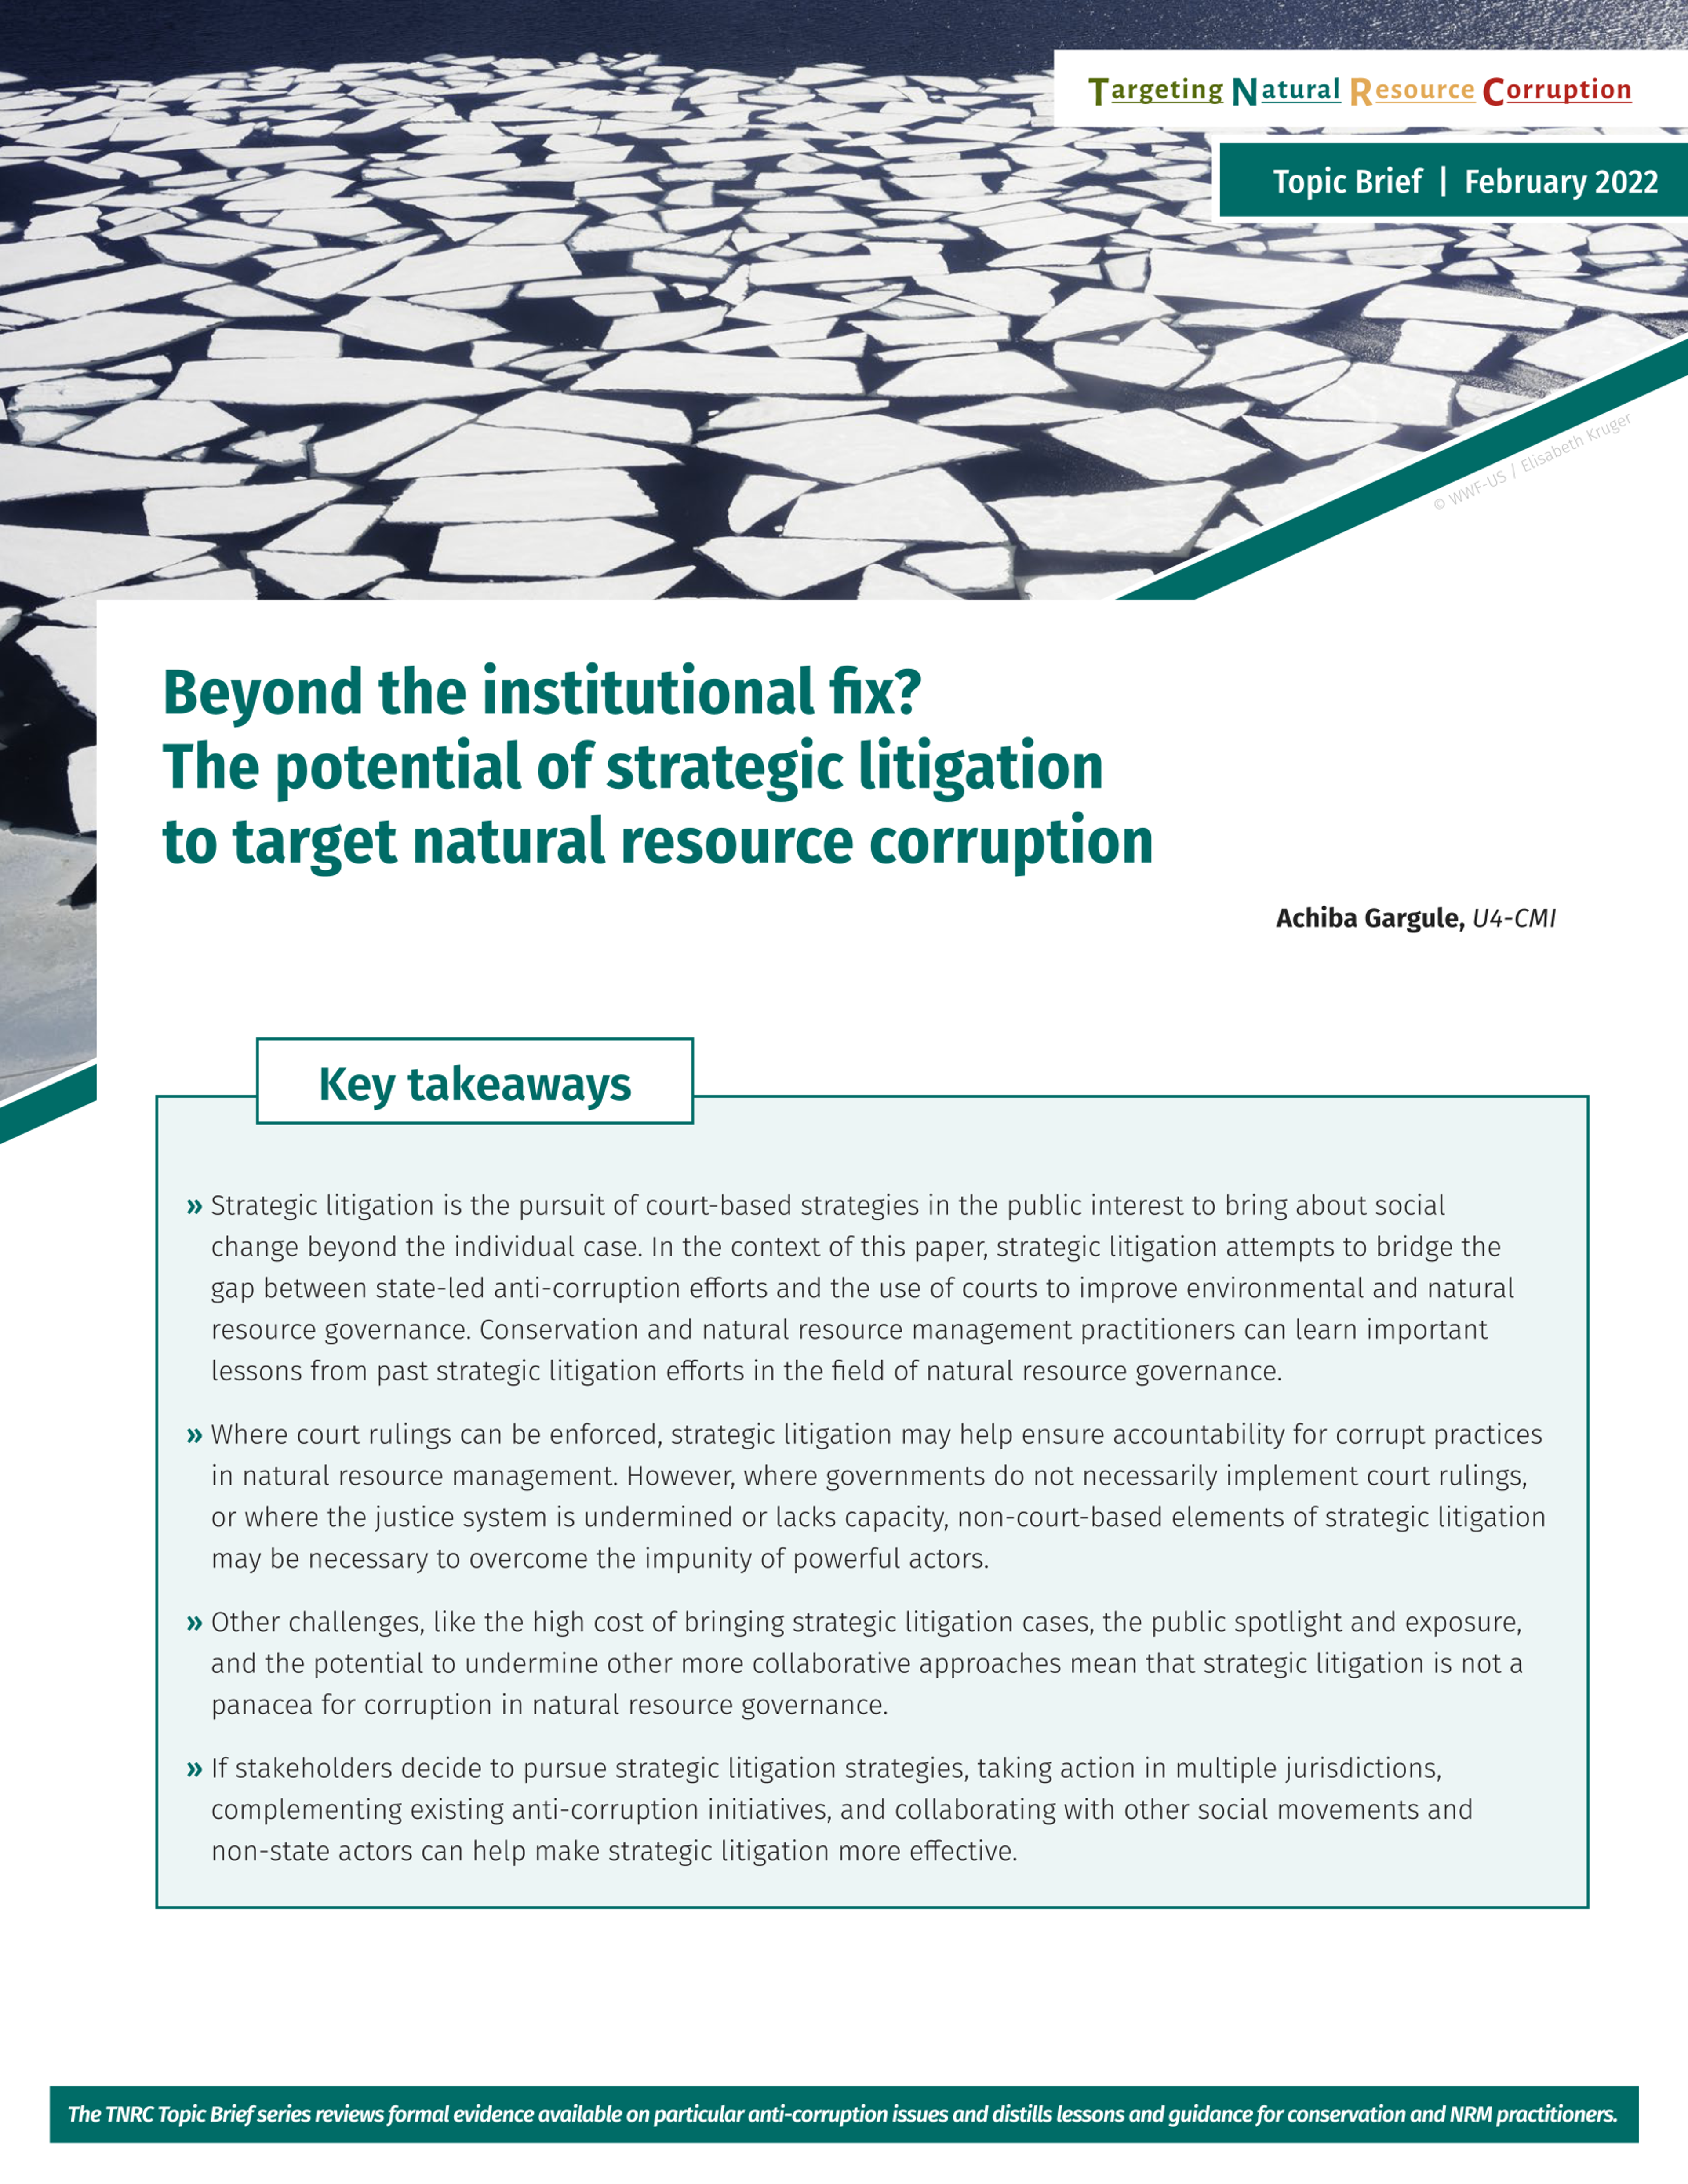 Beyond the institutional fix? The potential of strategic litigation to target natural resource corruption